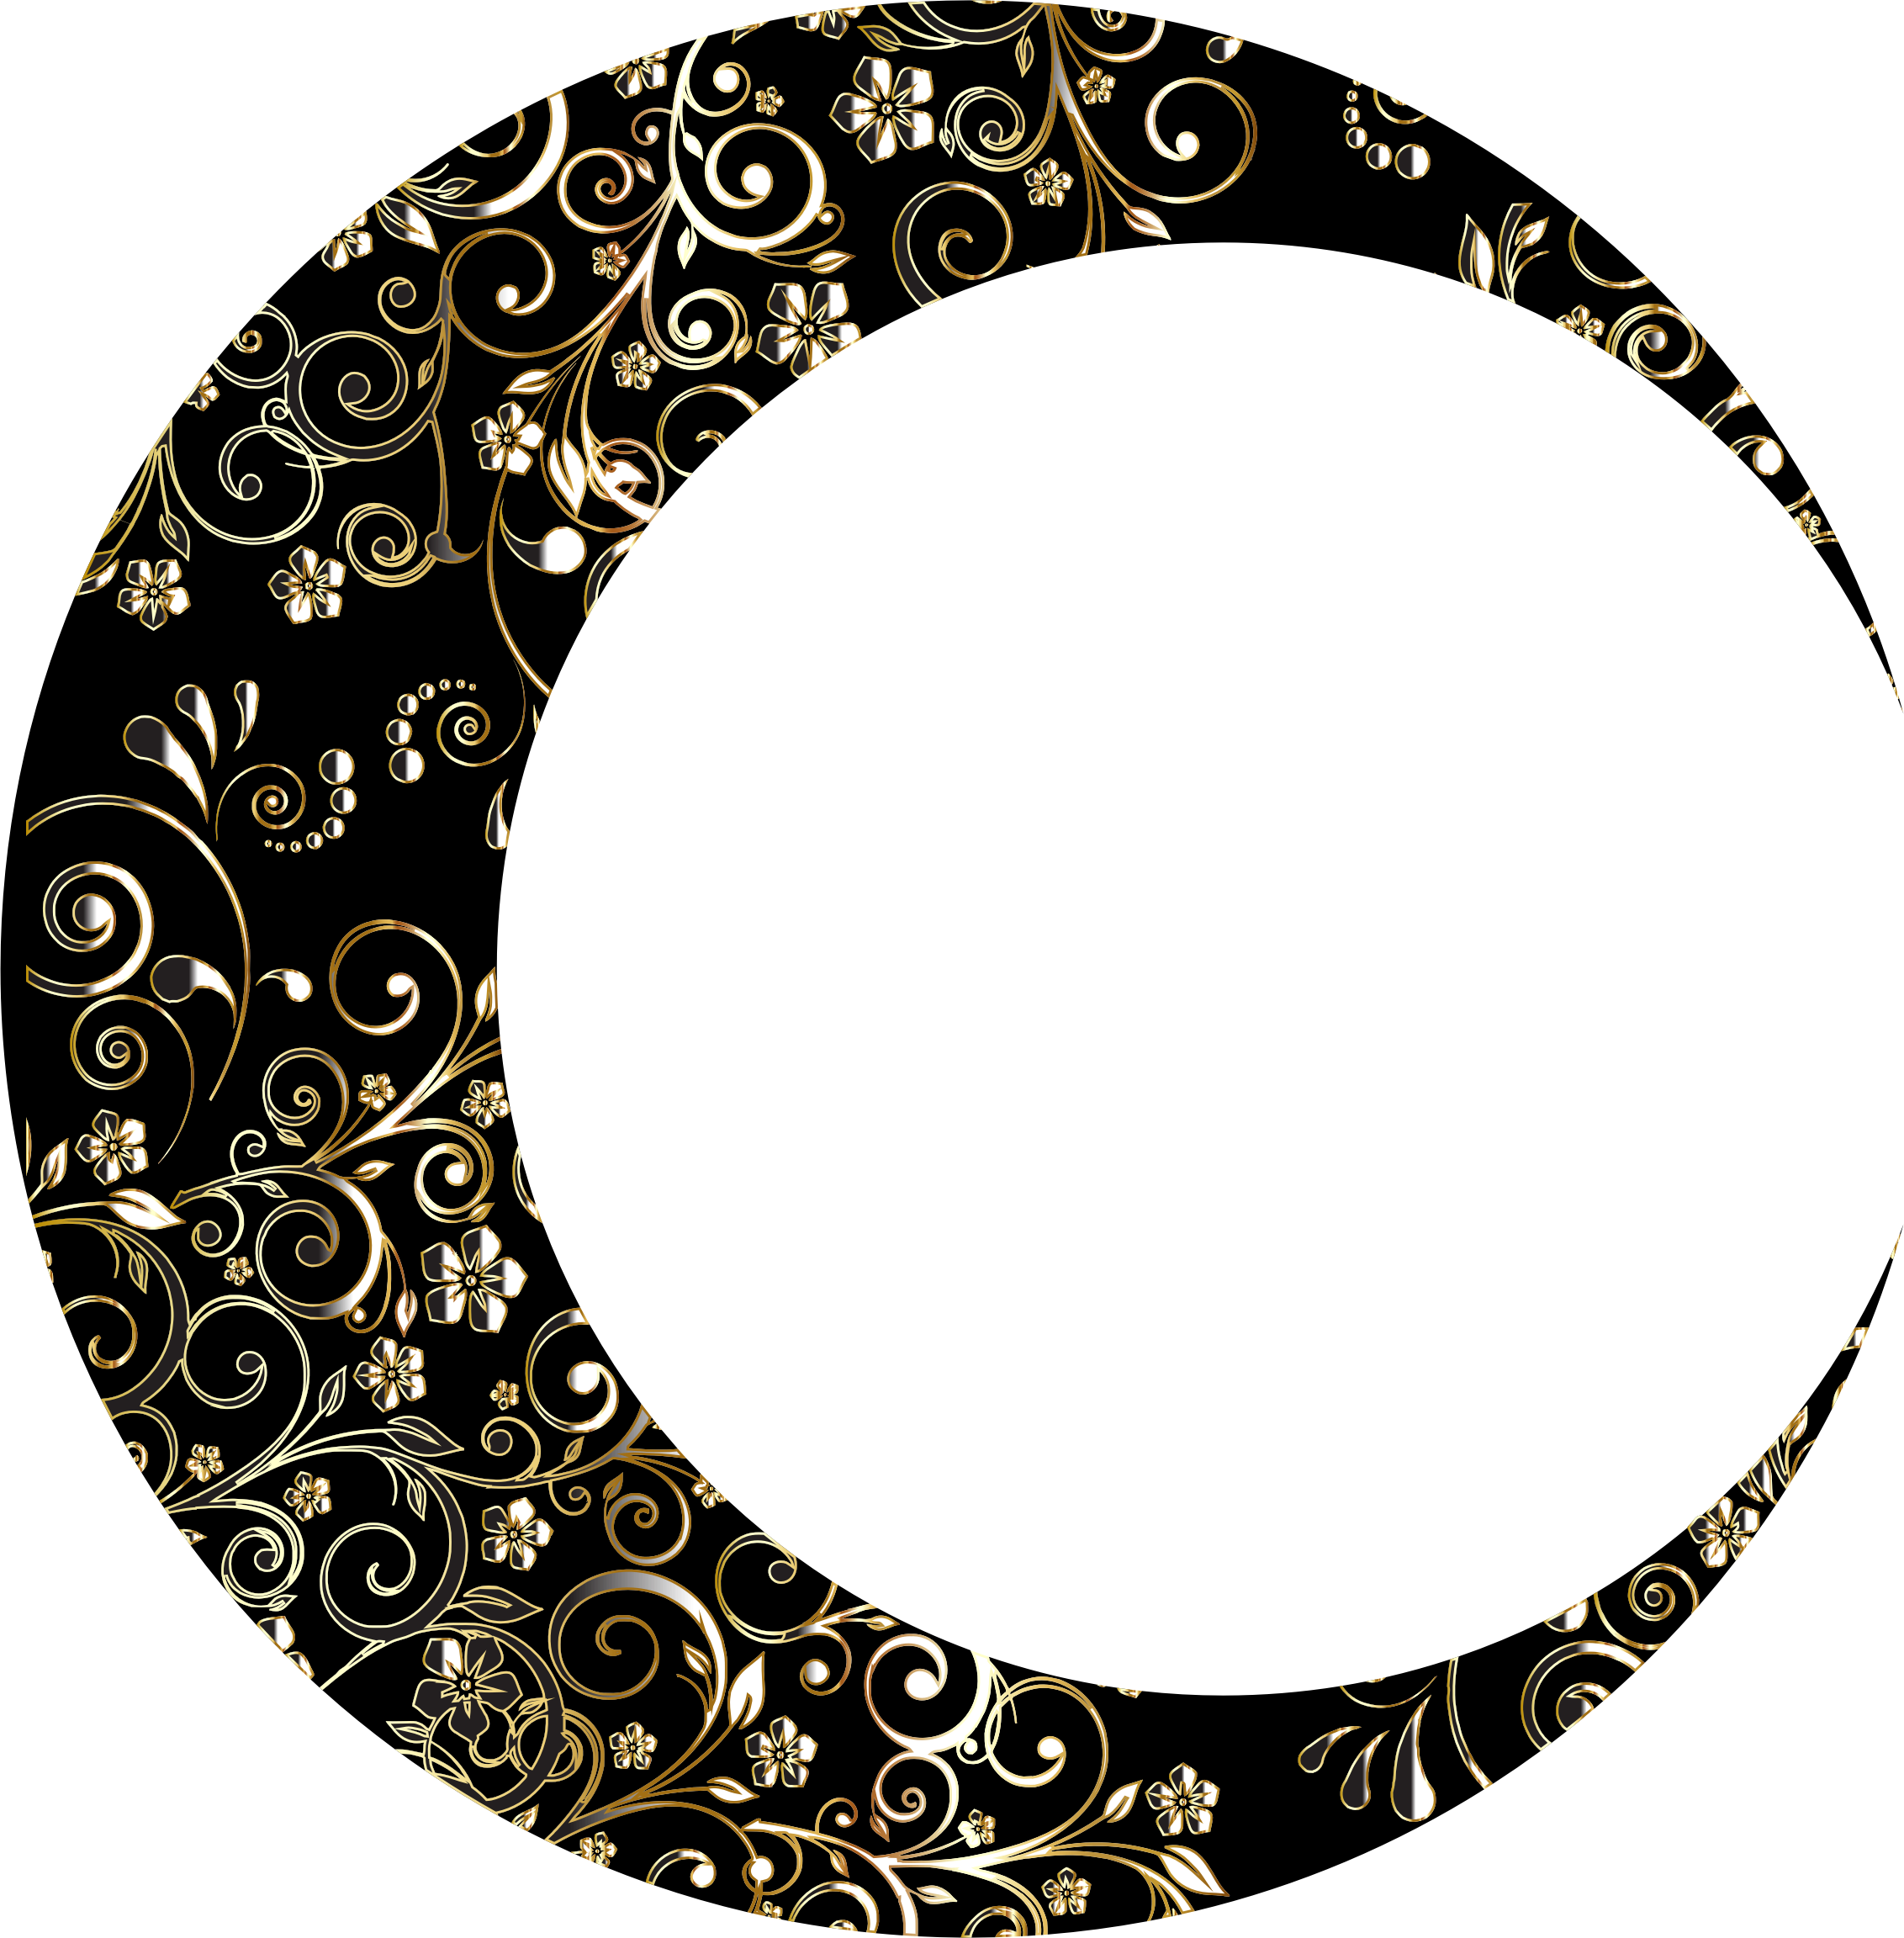 Moon clipart curved. Crescent at getdrawings com